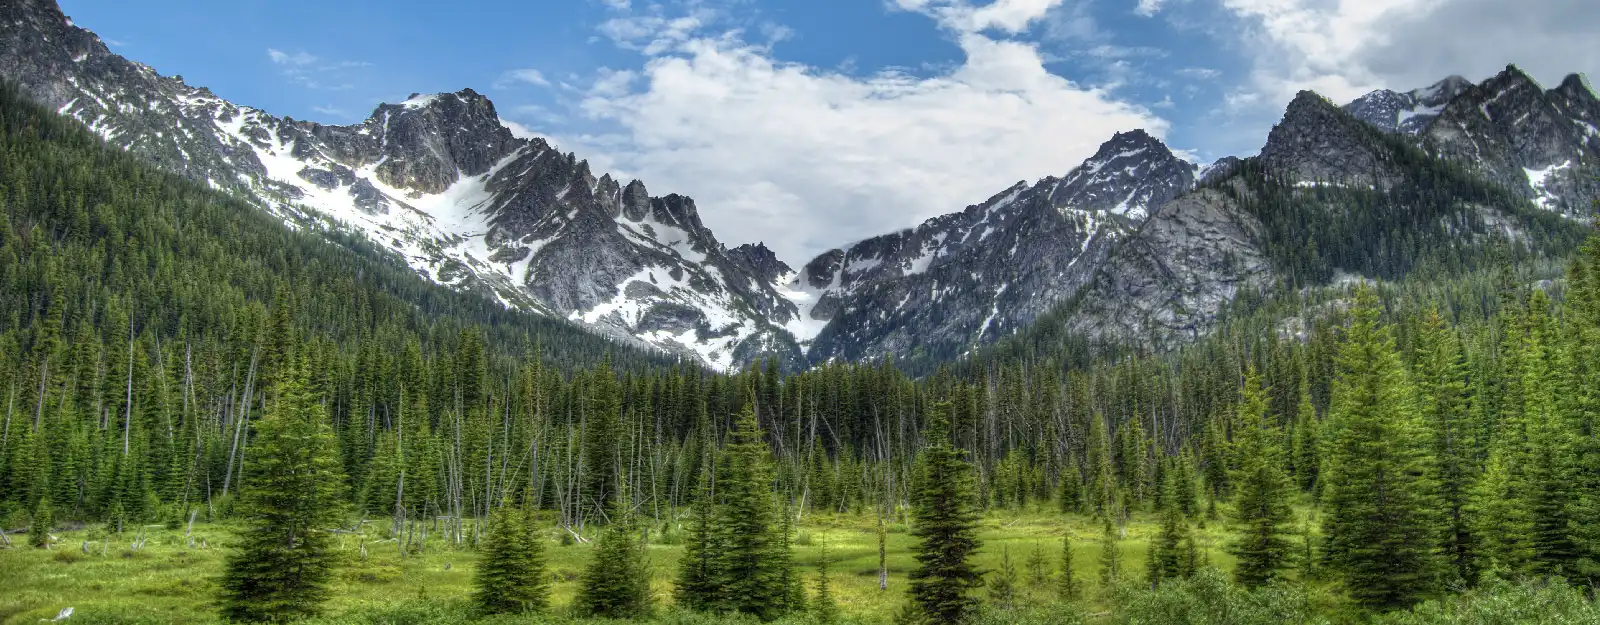 Evergreen forrest with mountains in the background